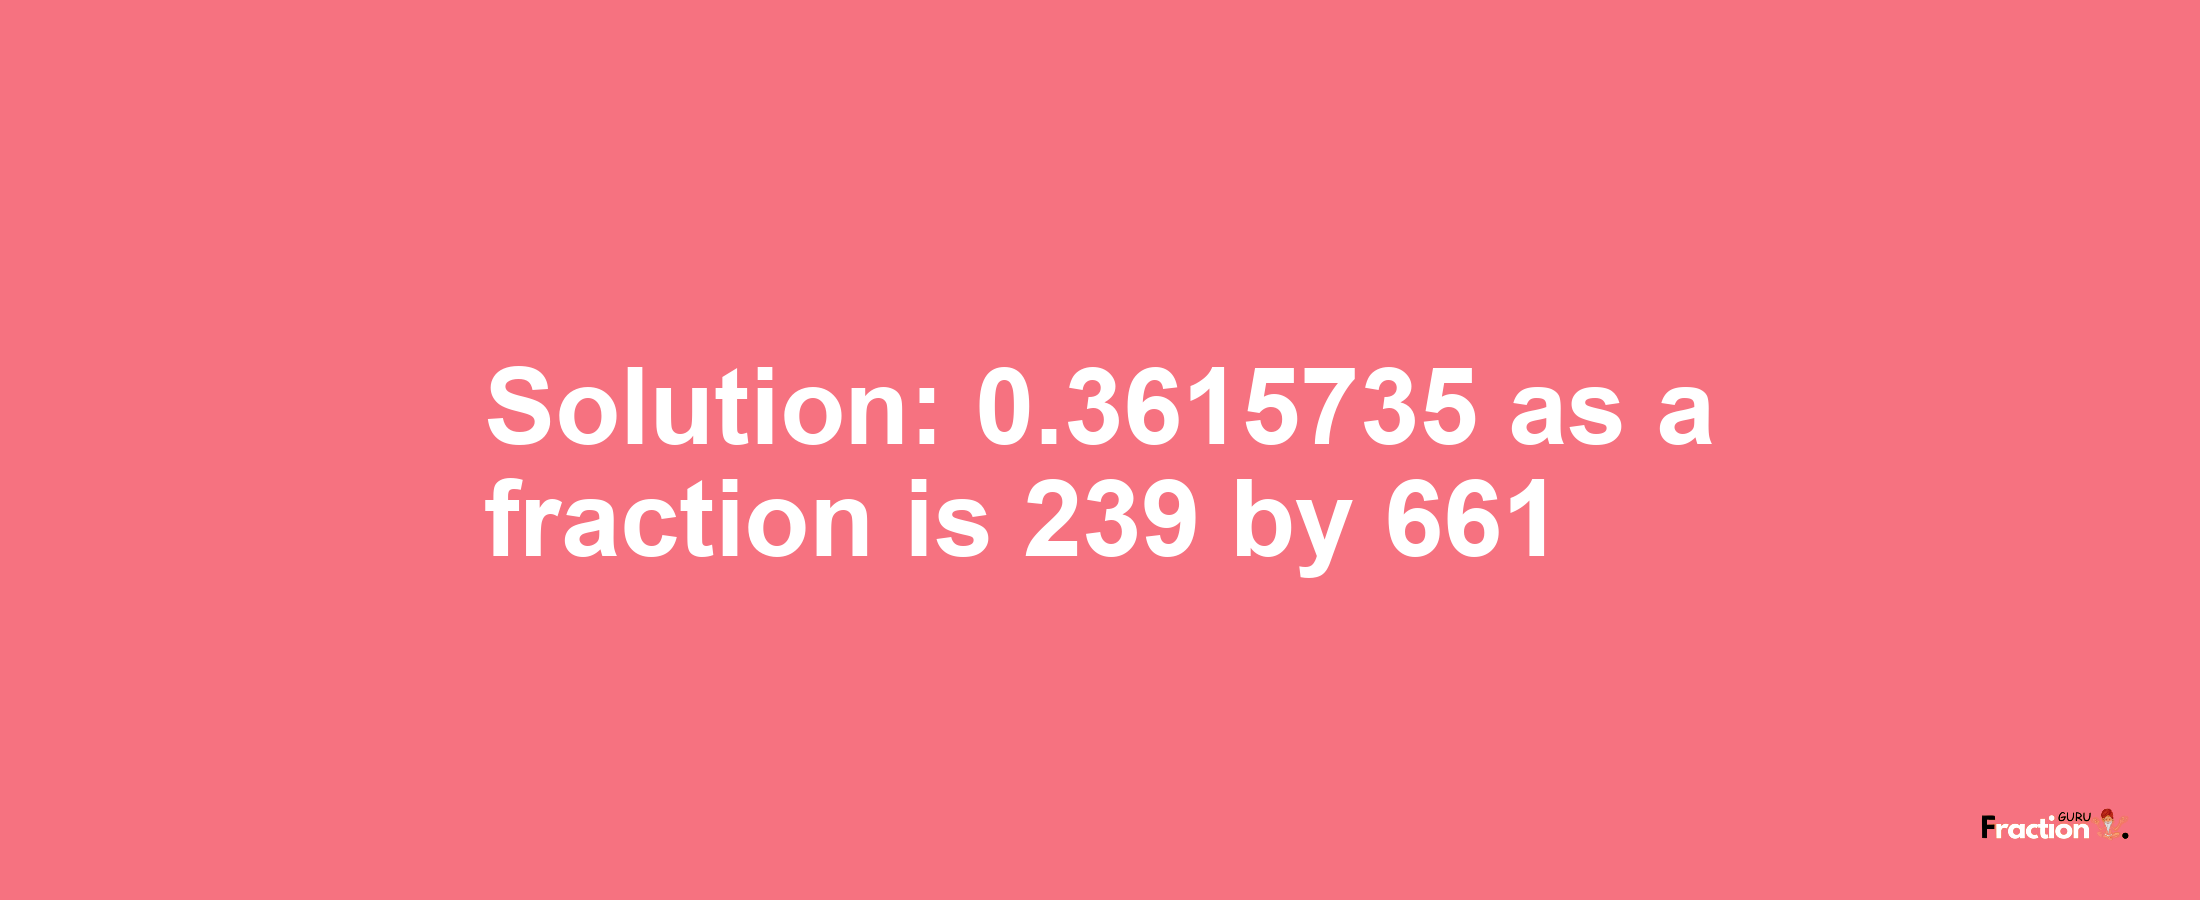 Solution:0.3615735 as a fraction is 239/661